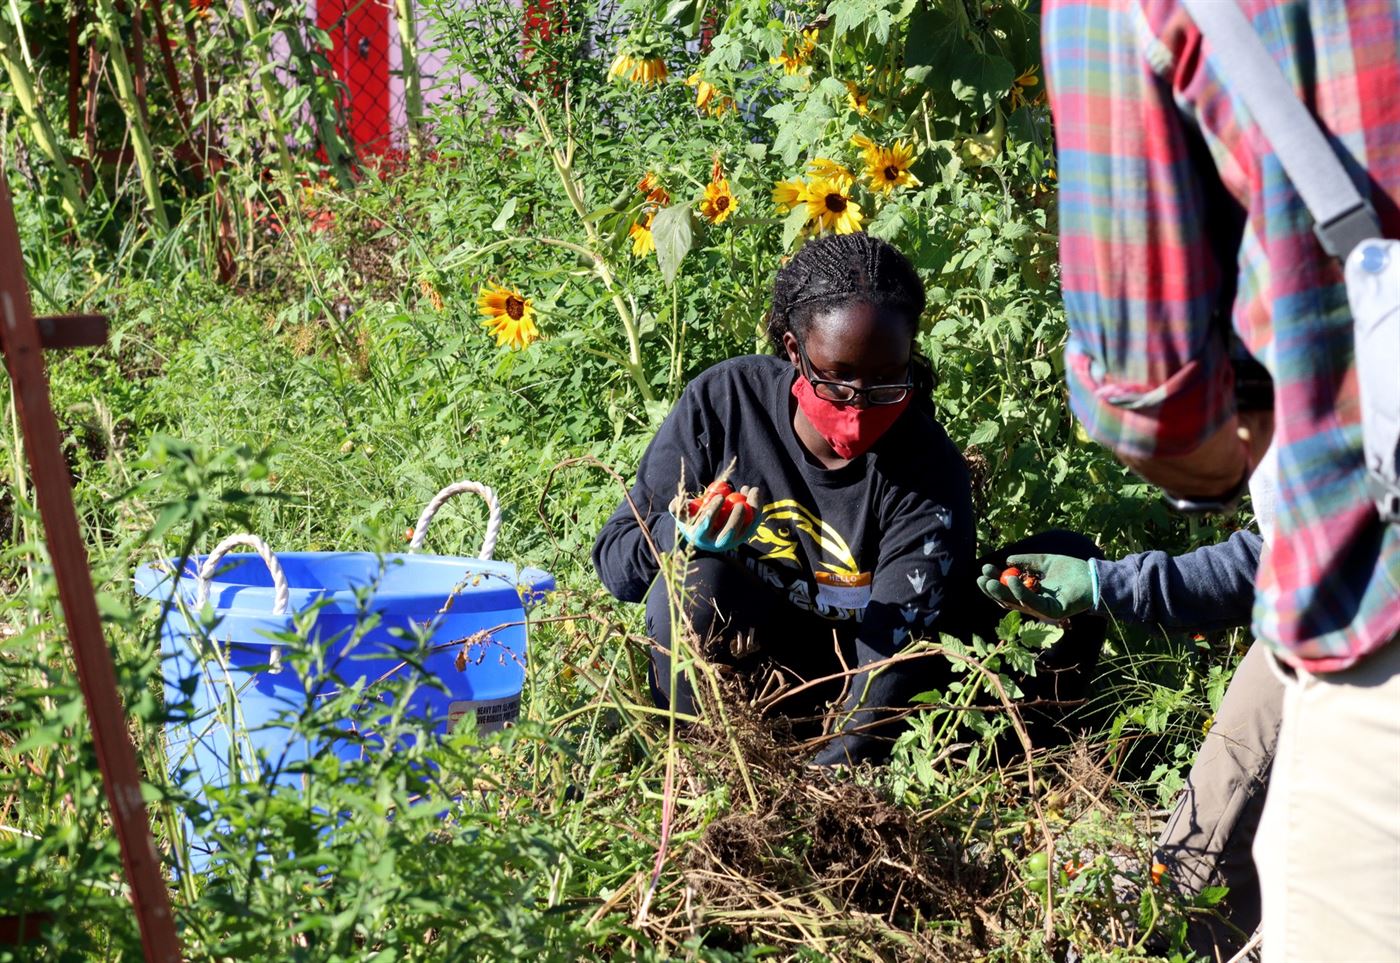 Ashley Obade helping pick tomatoes at the Student Center garden. John LaRosa | The Montclarion